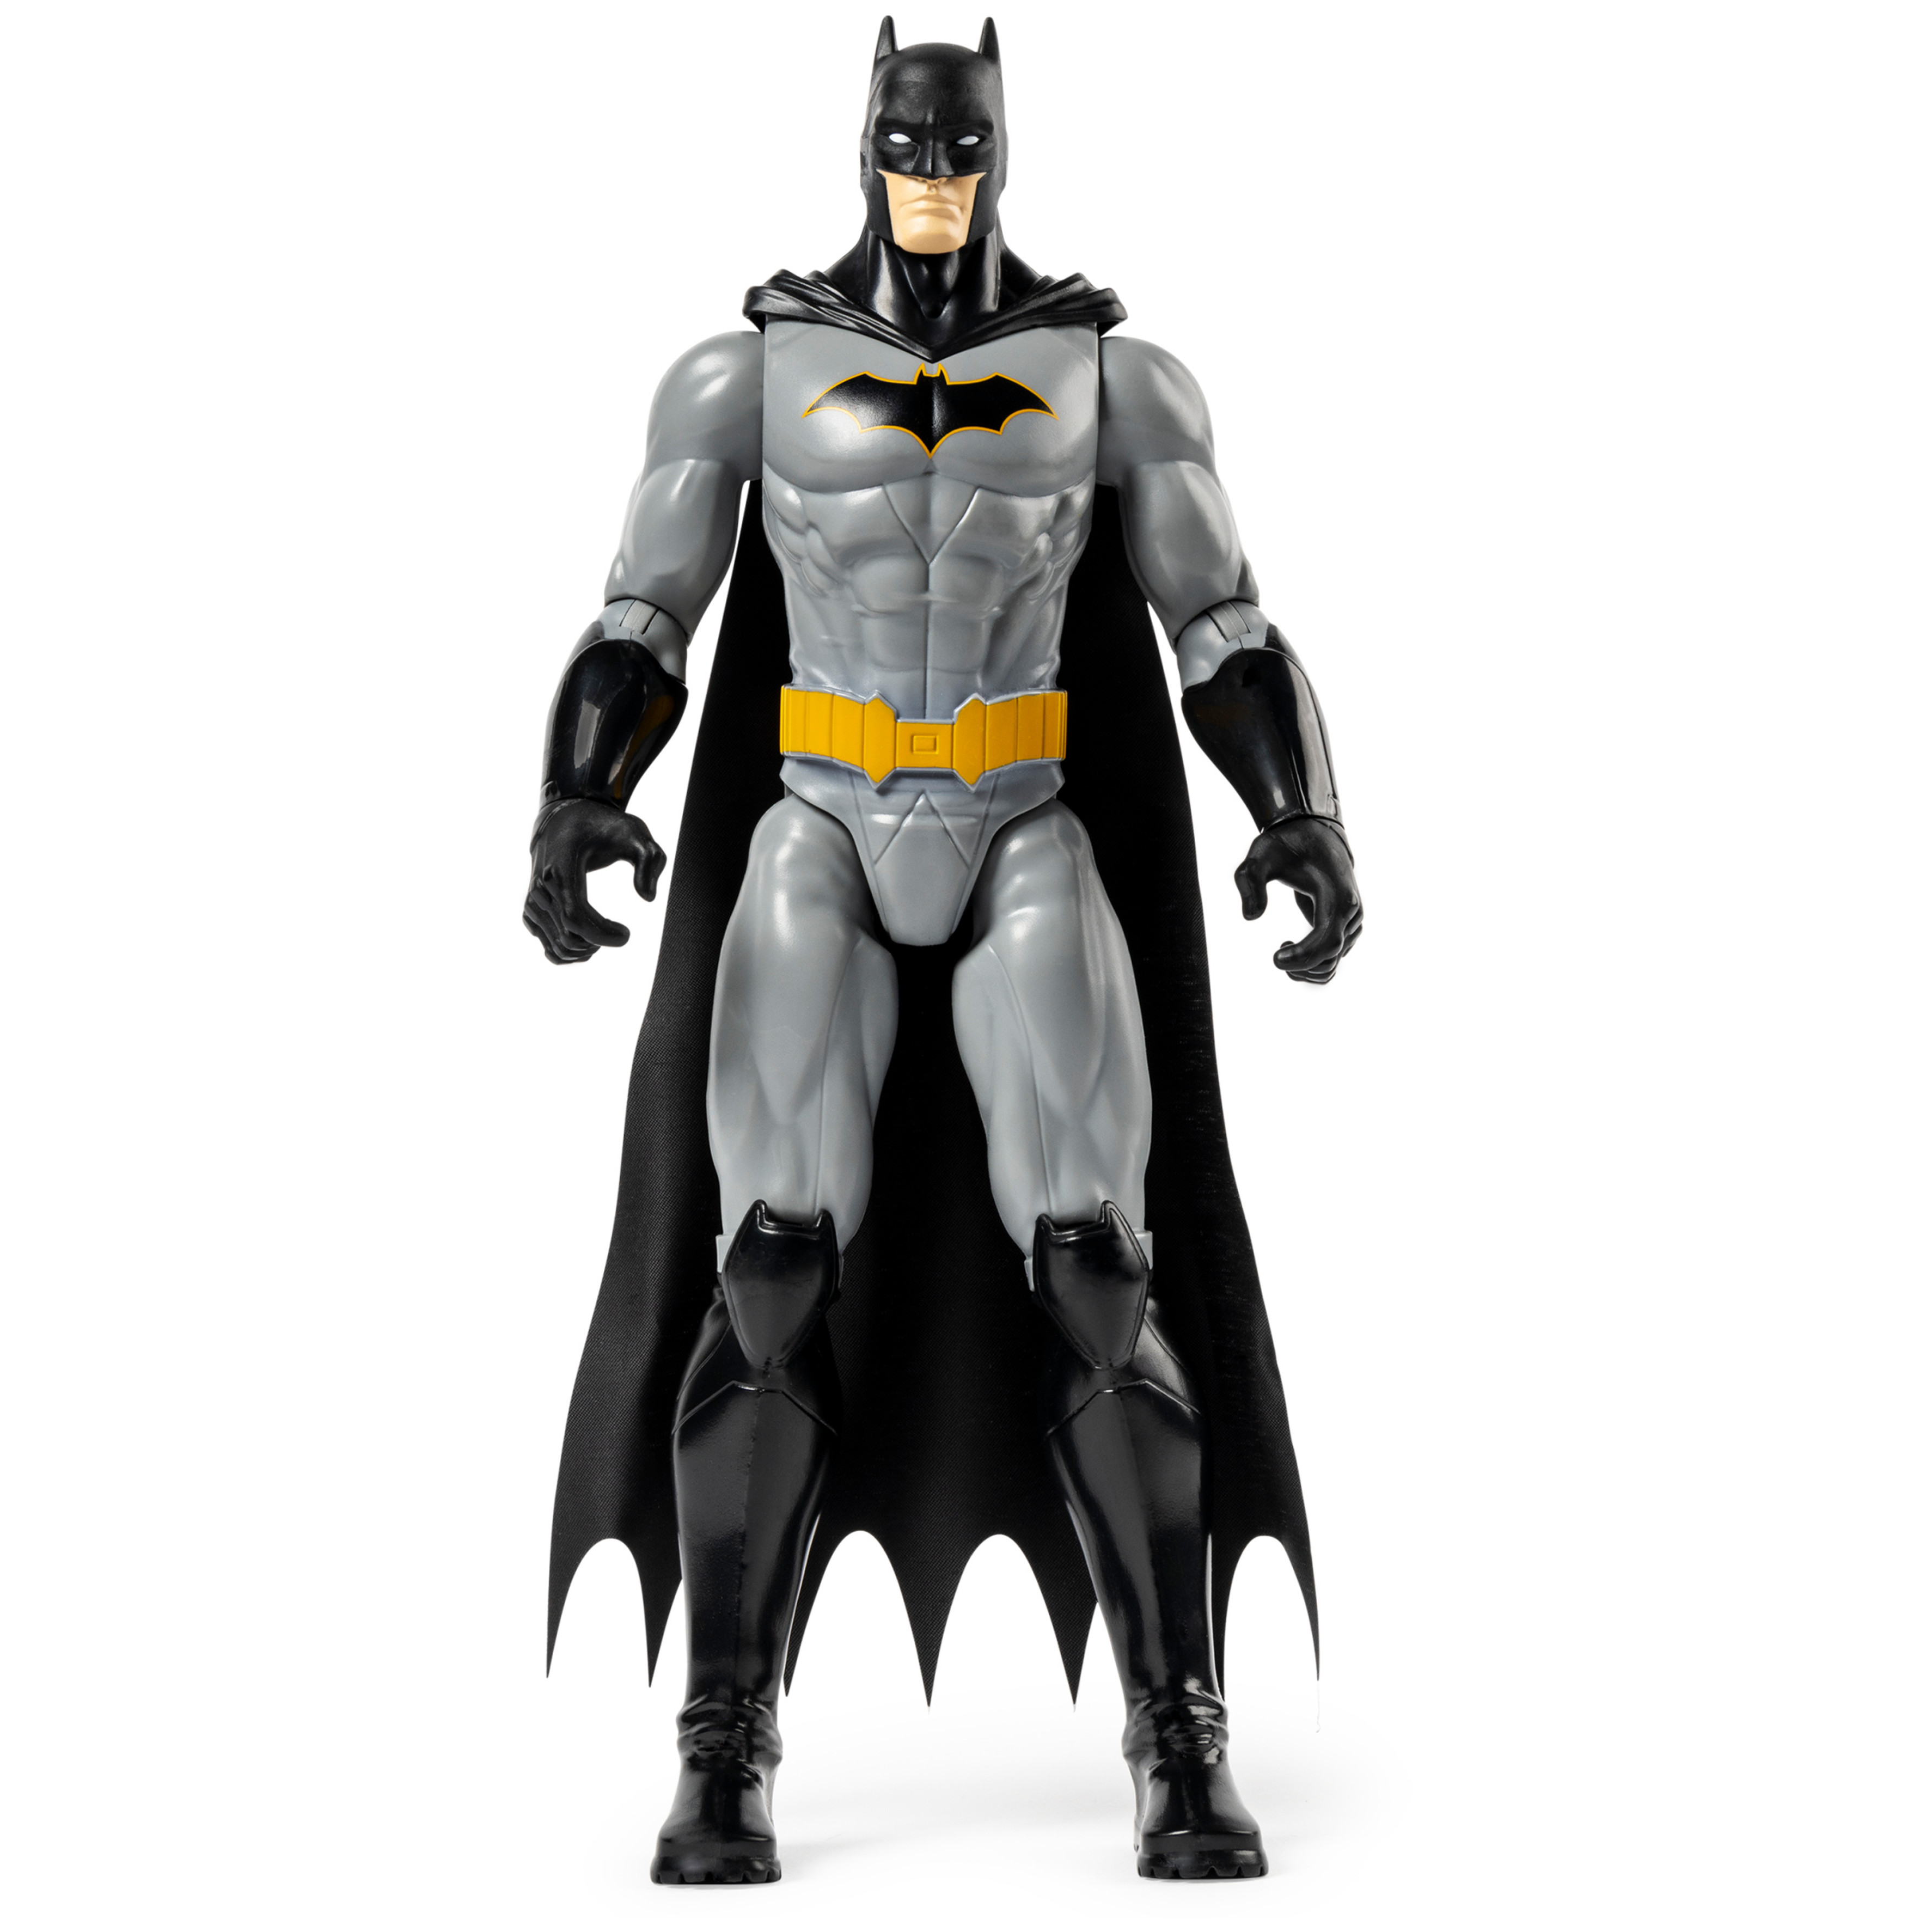 Batman 12-inch Rebirth Action Figure, Kids Toys for Boys Aged 3 and up - image 1 of 7